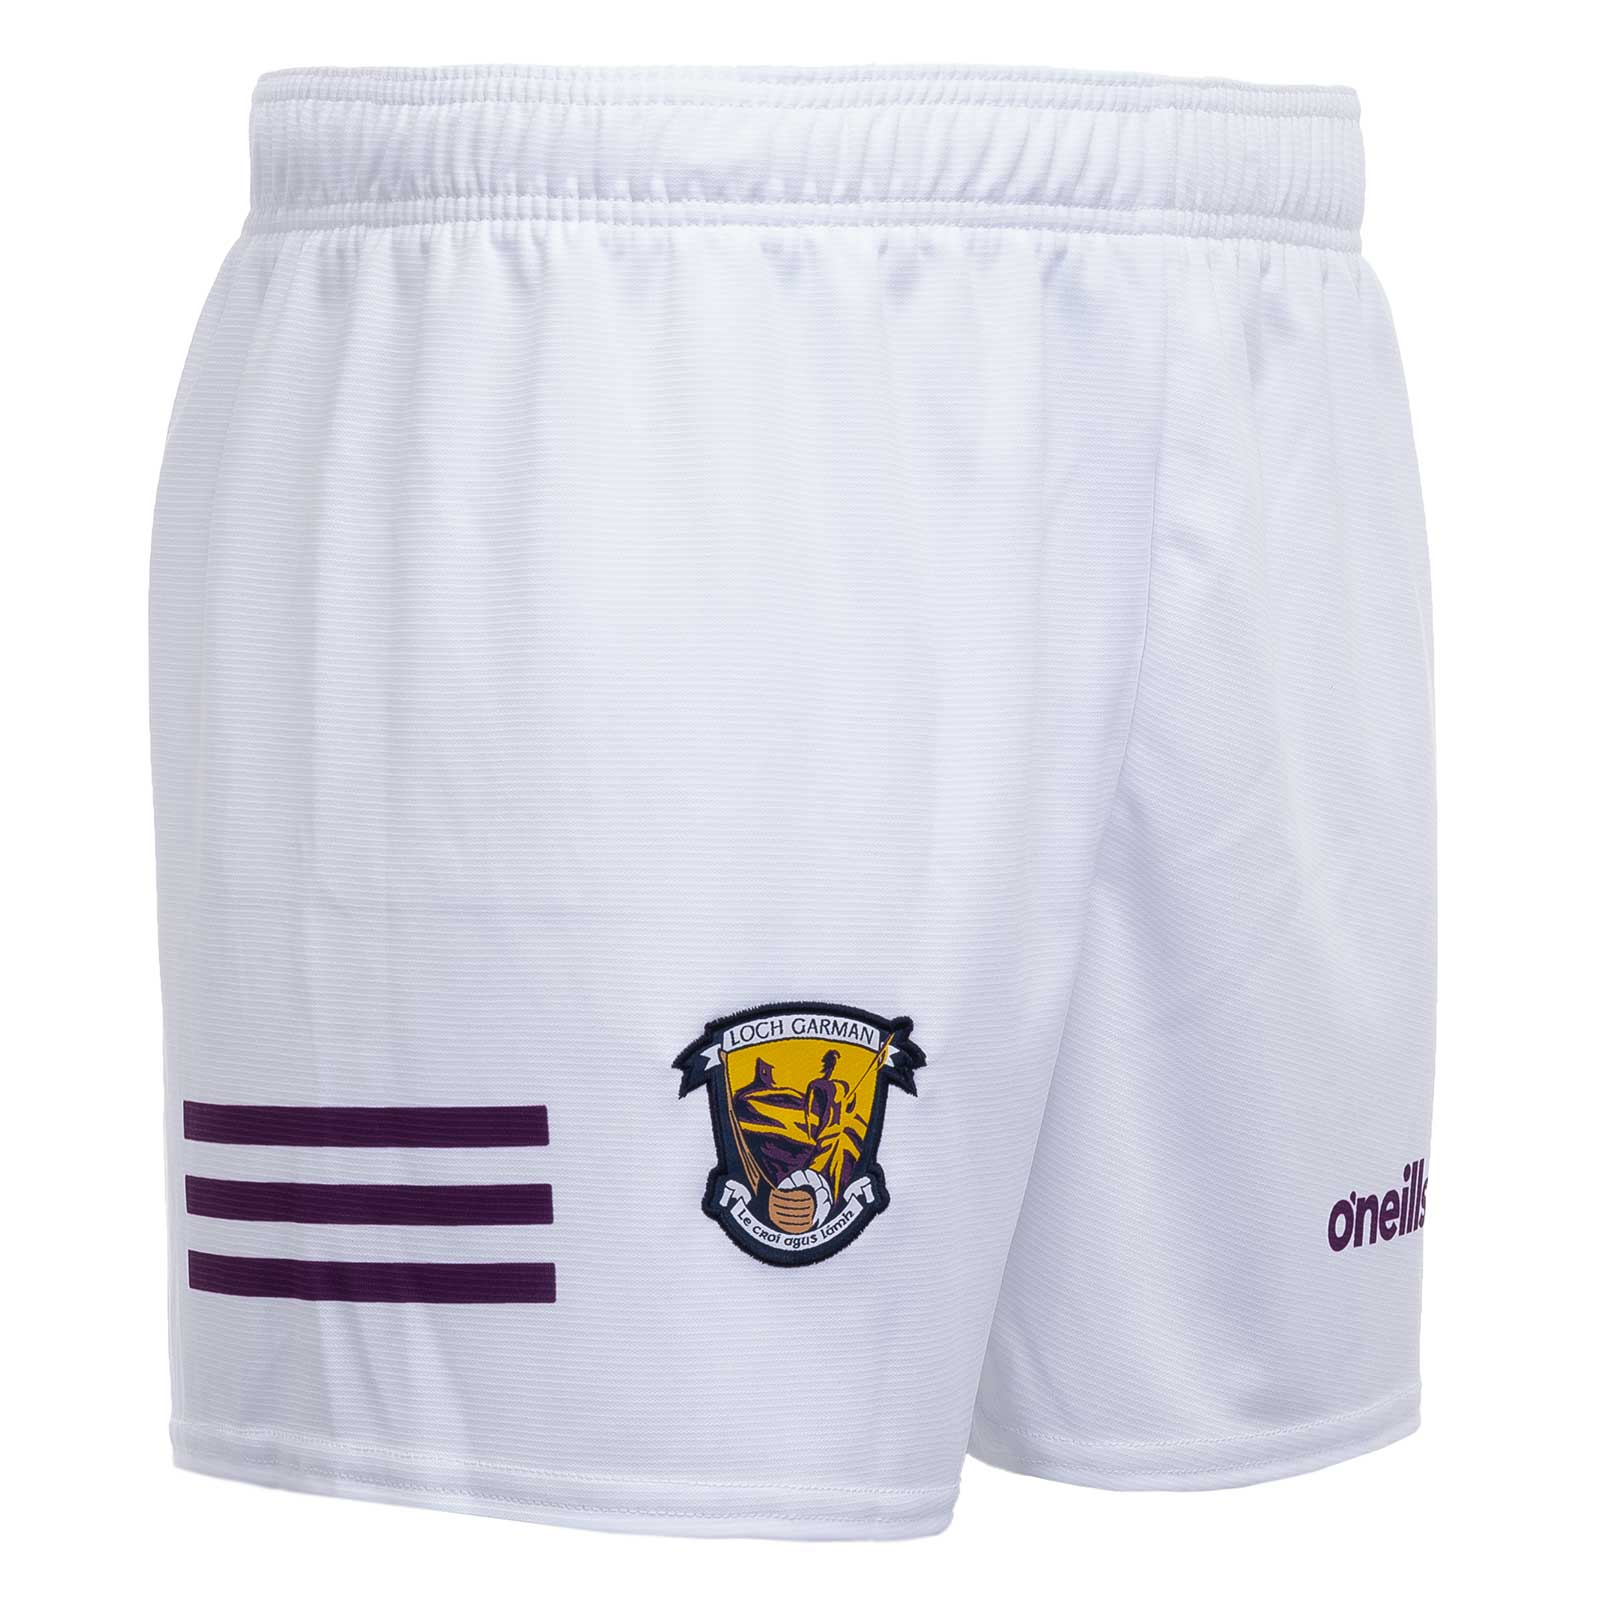 O'NEILLS WEXFORD 24 HOME PRINTED SHORT W